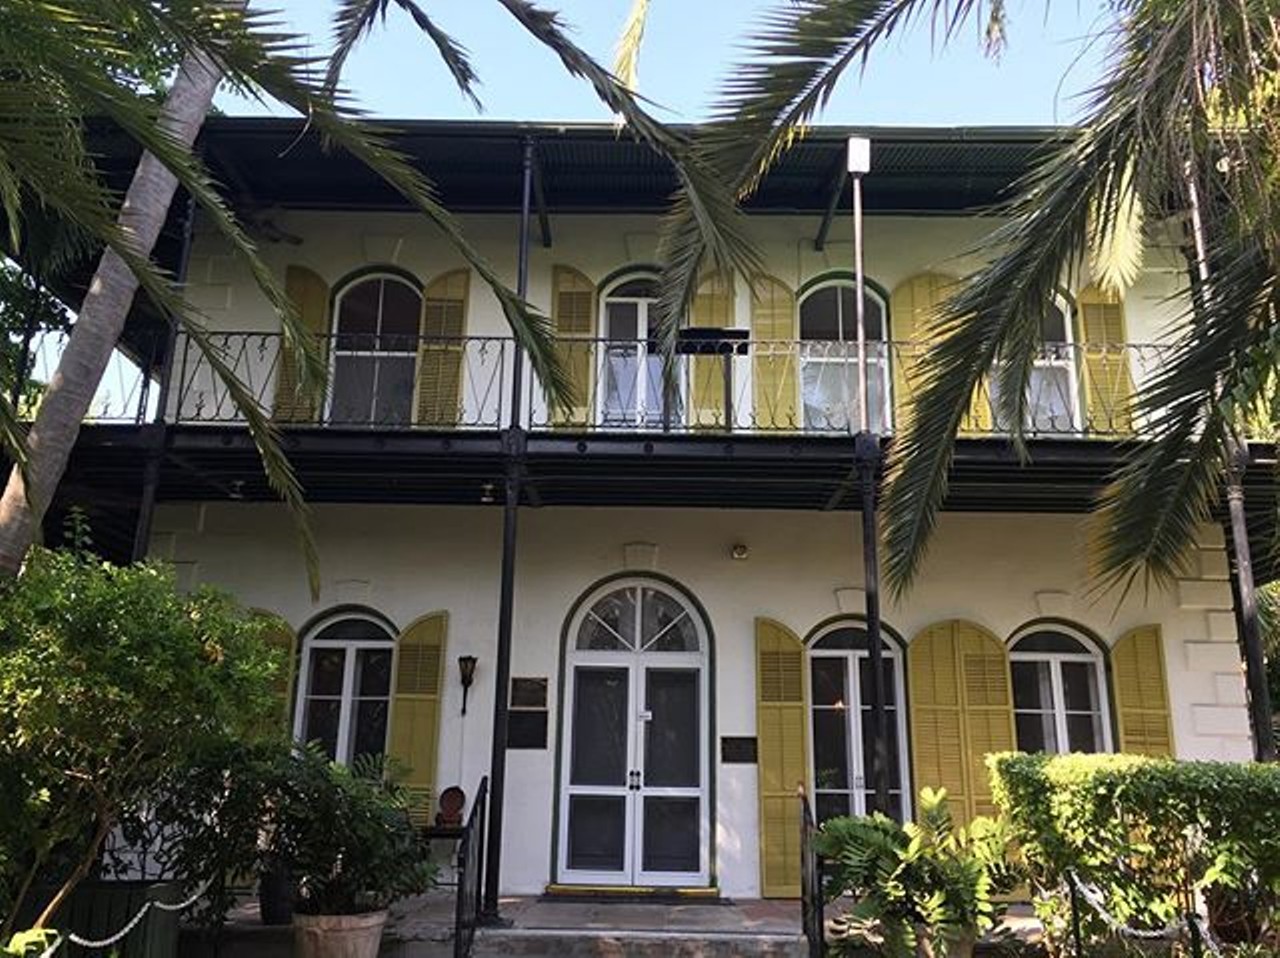 Ernest Hemingway Home and Museum 
907 Whitehead St., Key West, 305-294-1136
Distance from Orlando: 6 hours and 49 minutes
The house was built in 1851 and Ernest Hemingway lived in this house from 1931 until his death in 1961. The house in Old Town Key West still has the furniture that there Hemingway and his family used. 
Photo via jaymesmith1/Instagram